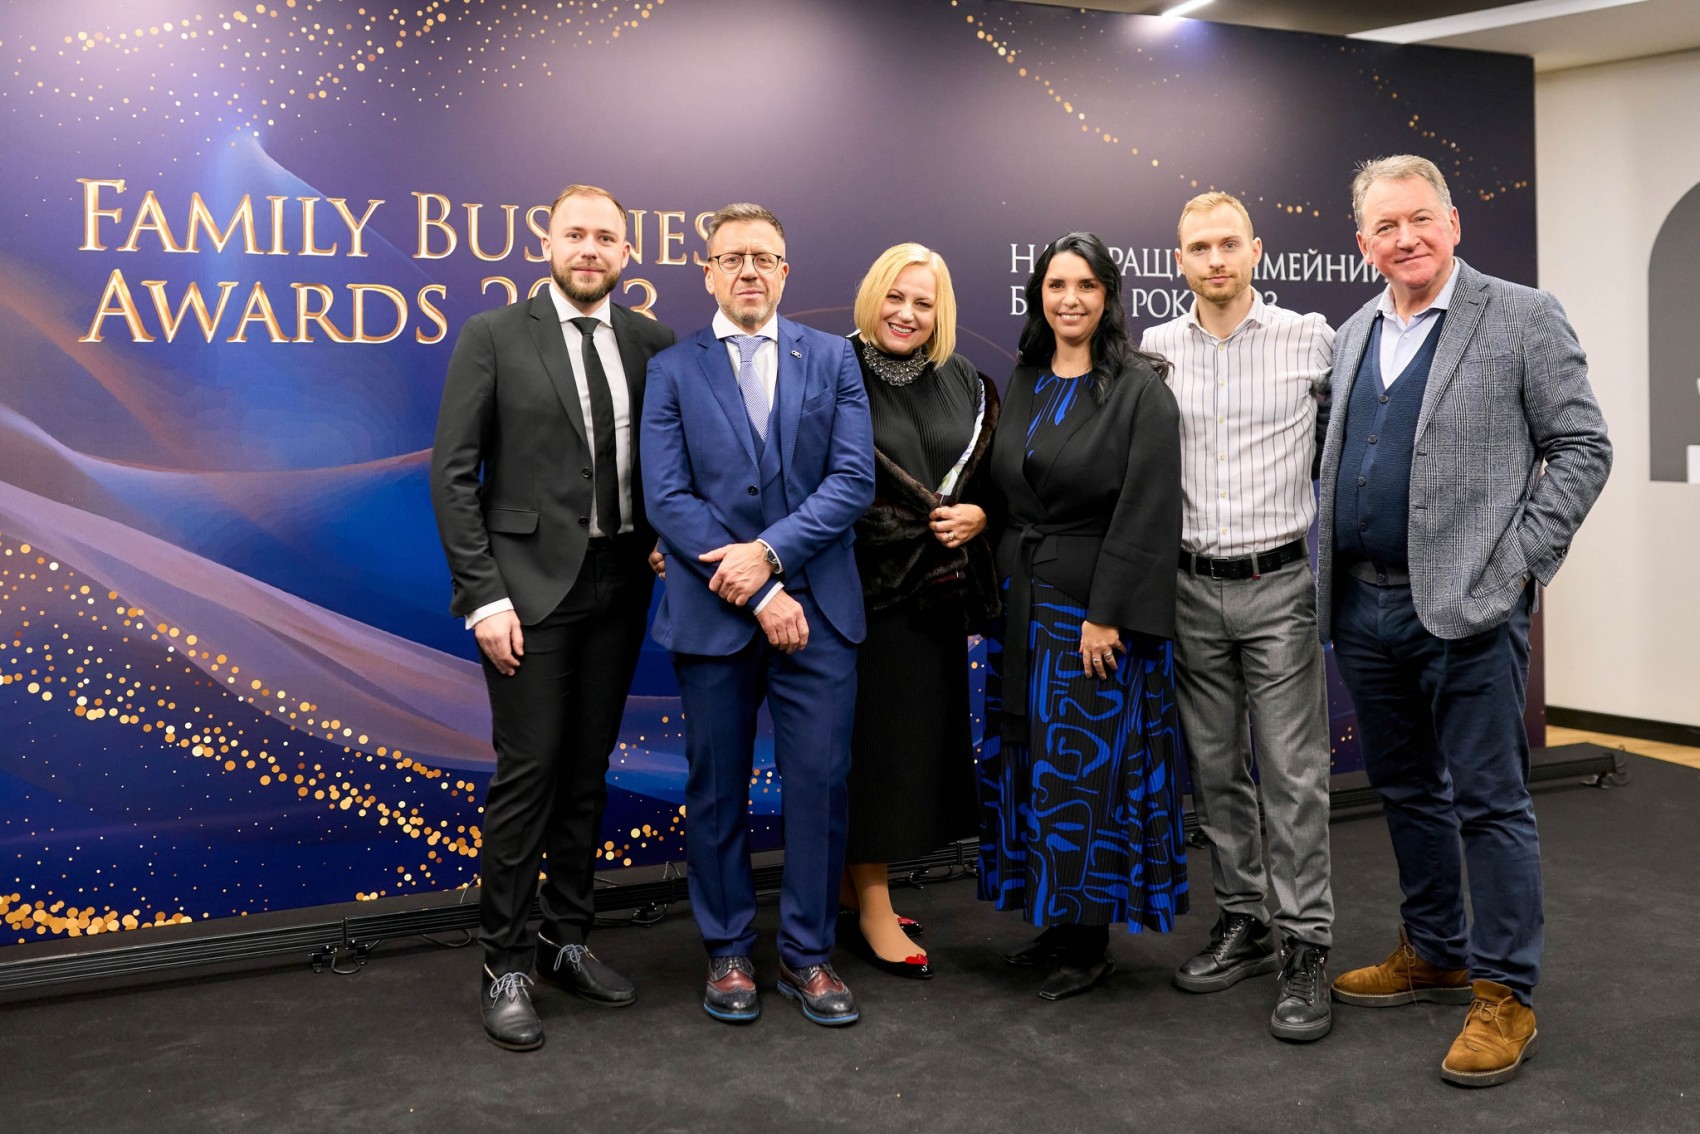 On December 8, the award ceremony of the annual Family Business Awards winners took place